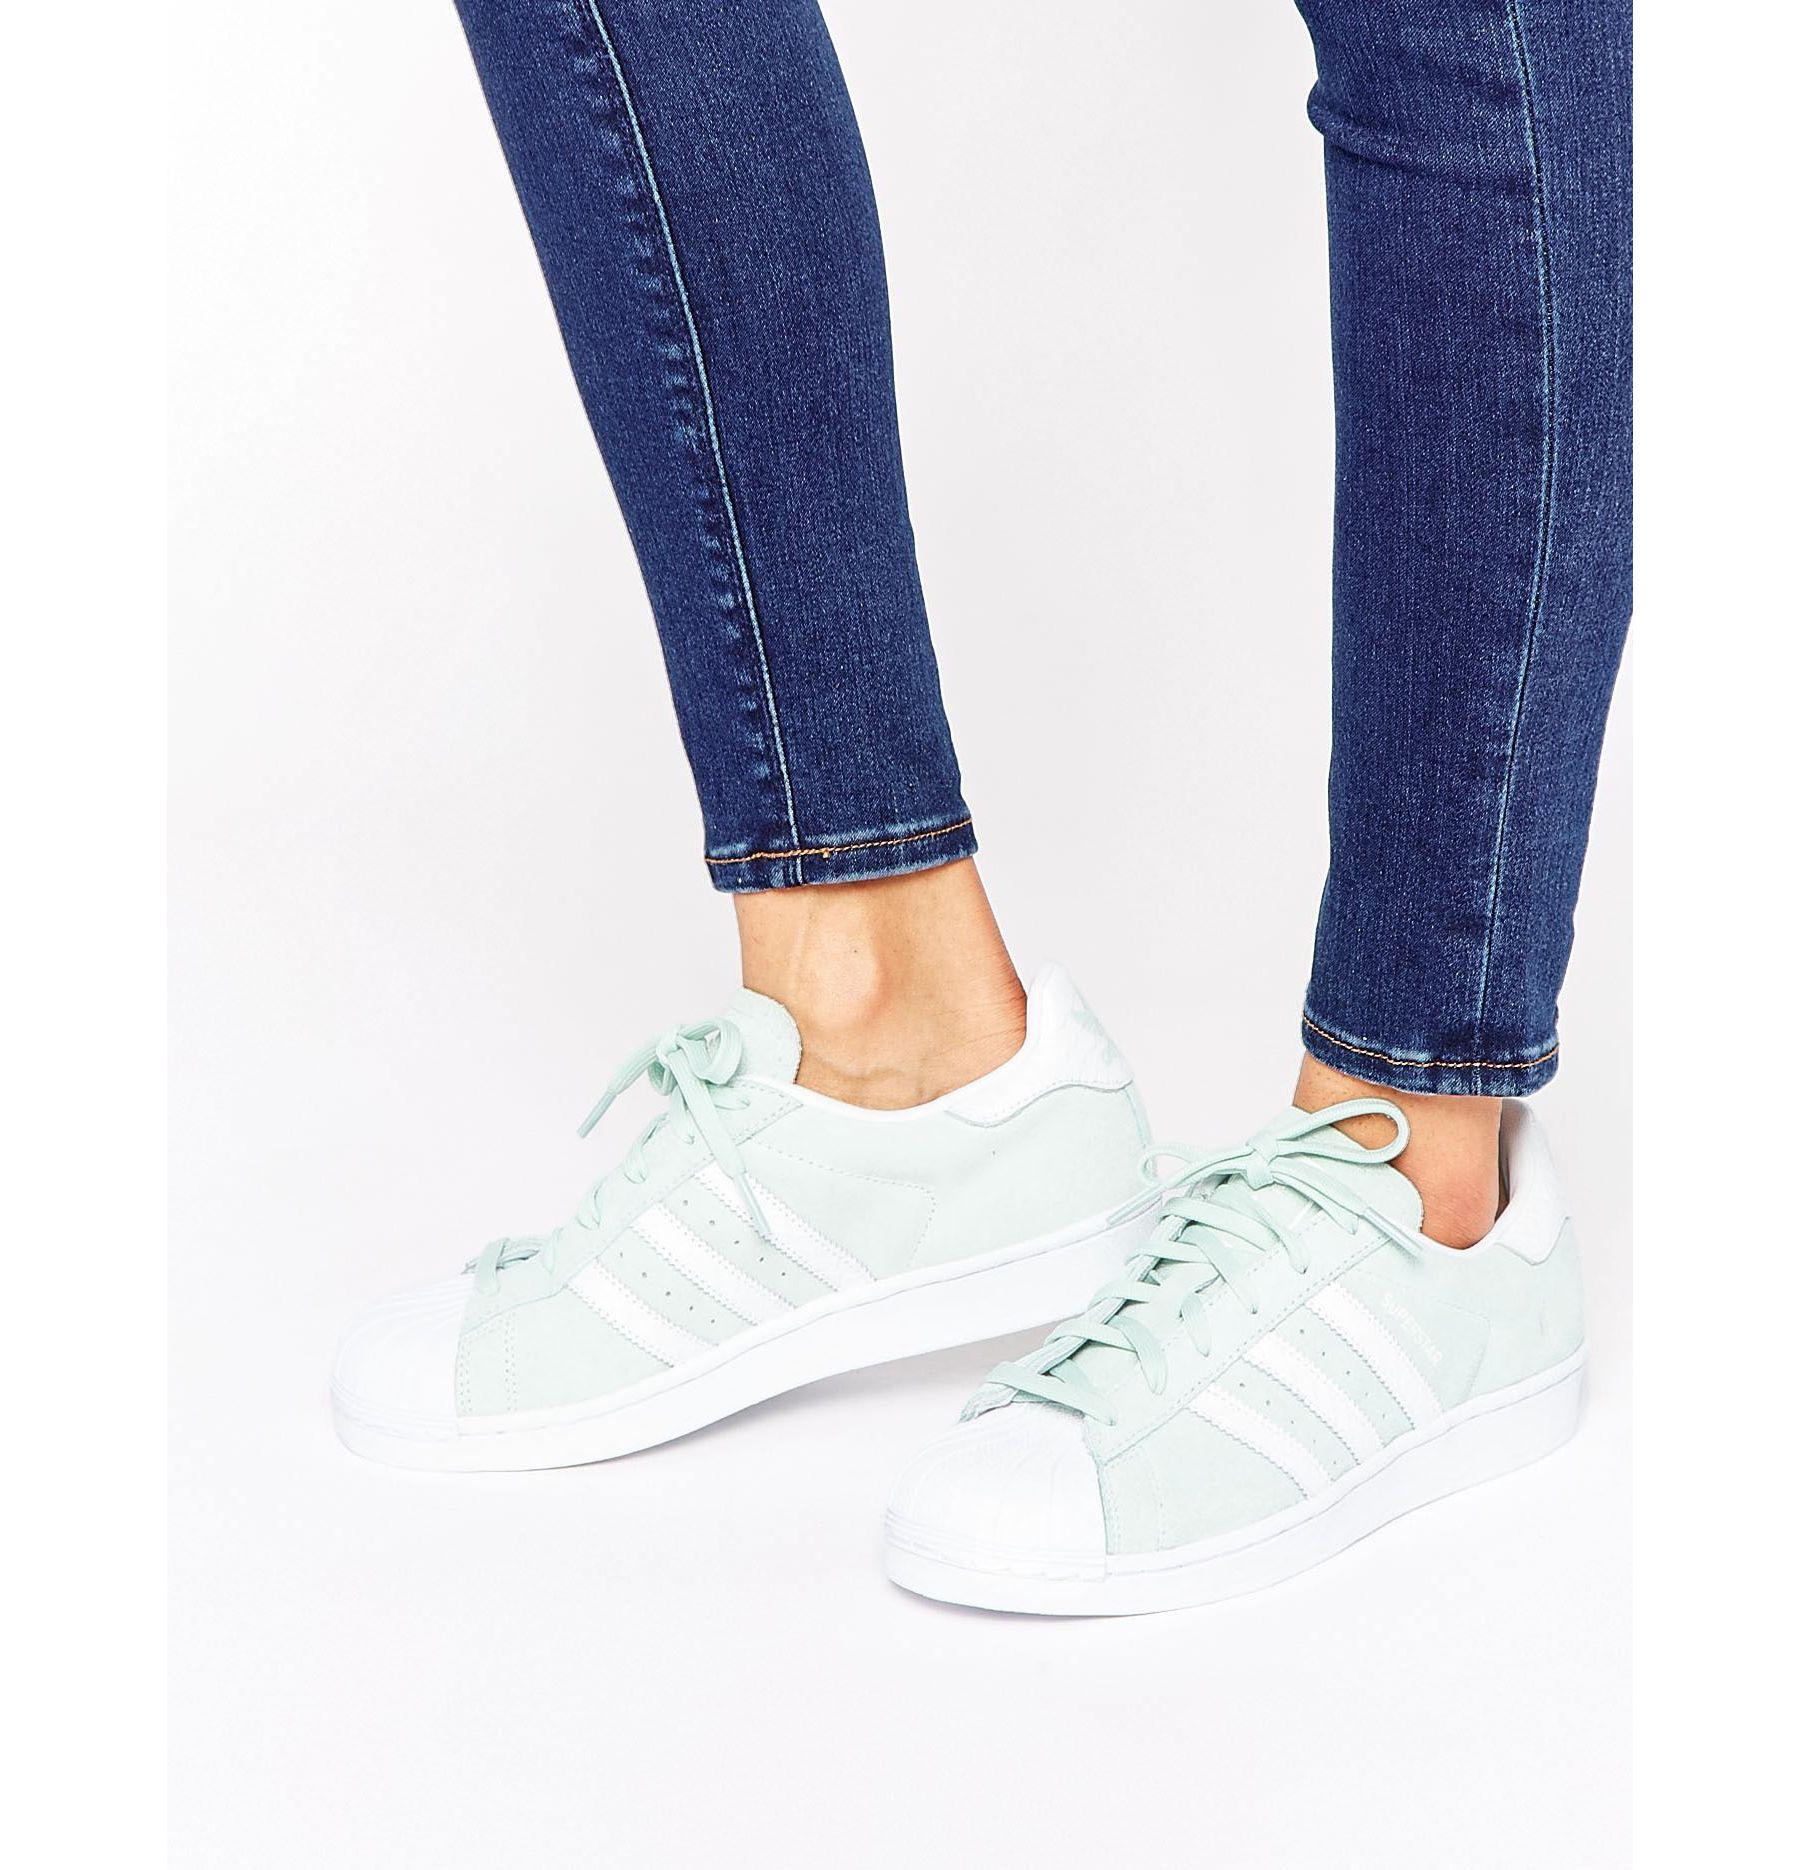 Cheap Adidas Superstars Shop for Cheap Adidas Superstars on Polyvore